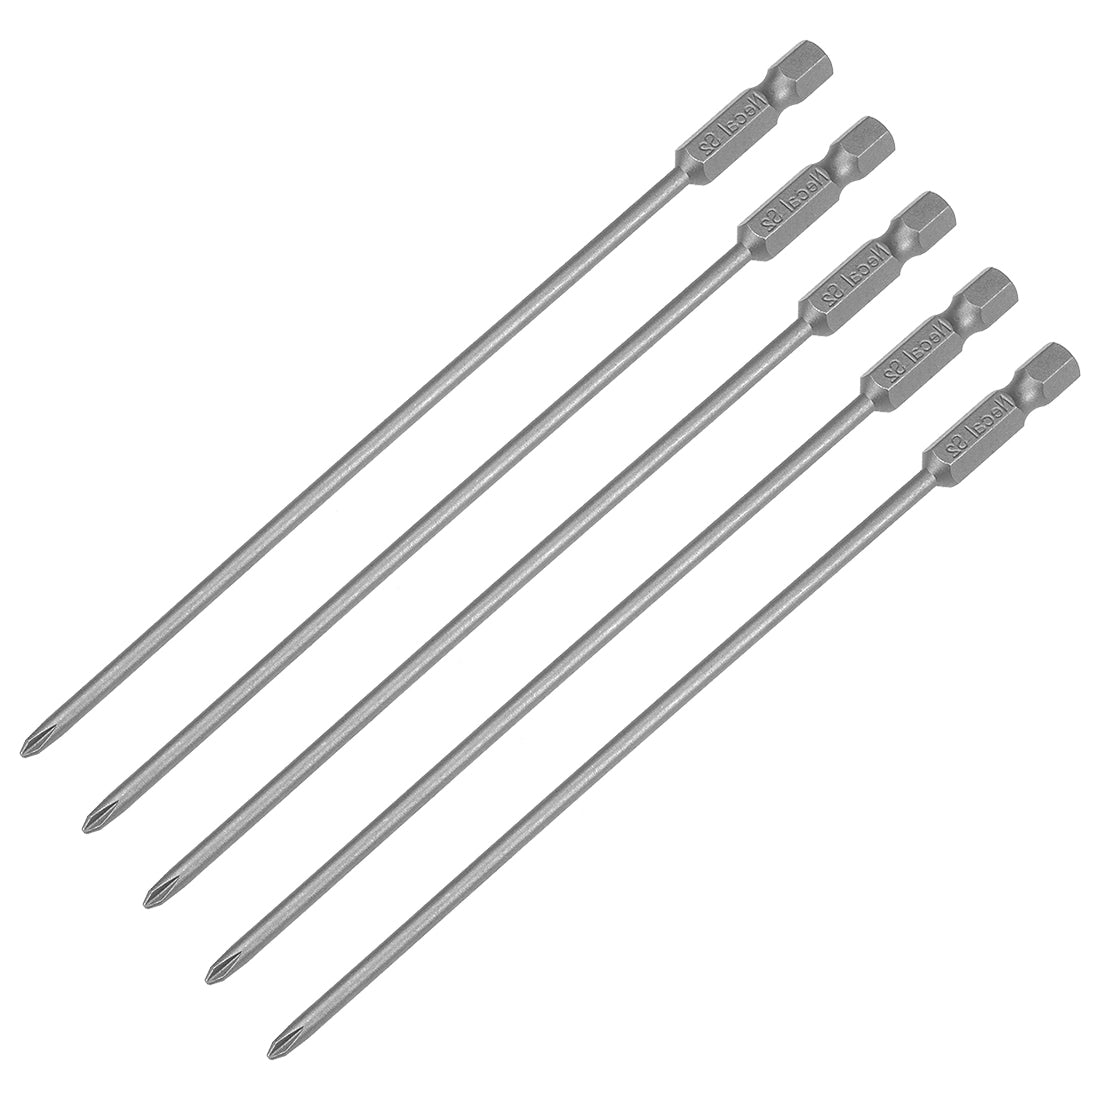 uxcell Uxcell Magnetic Phillips Screwdriver Bits, Hex Shank S2 Steel Power Tools